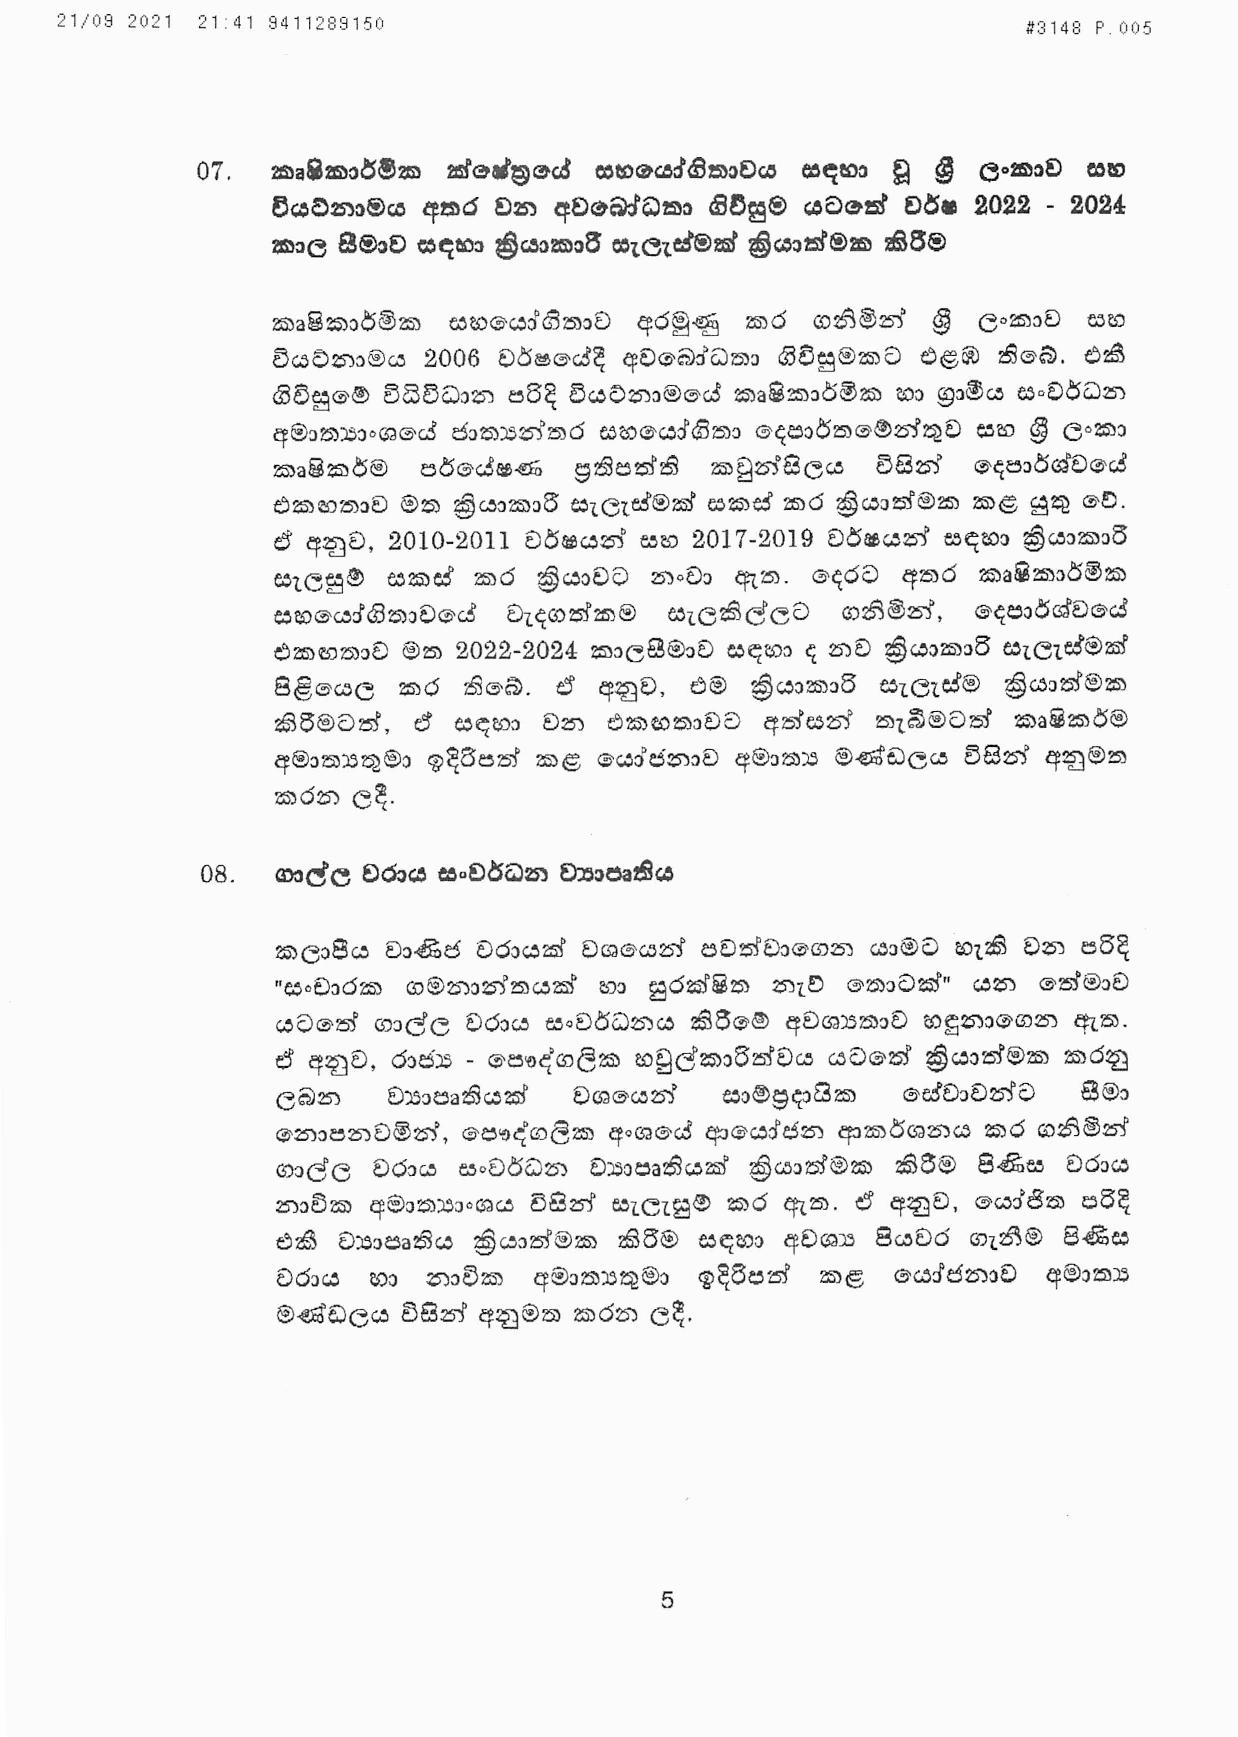 Cabinet Decisions on 21.09.2021 page 005